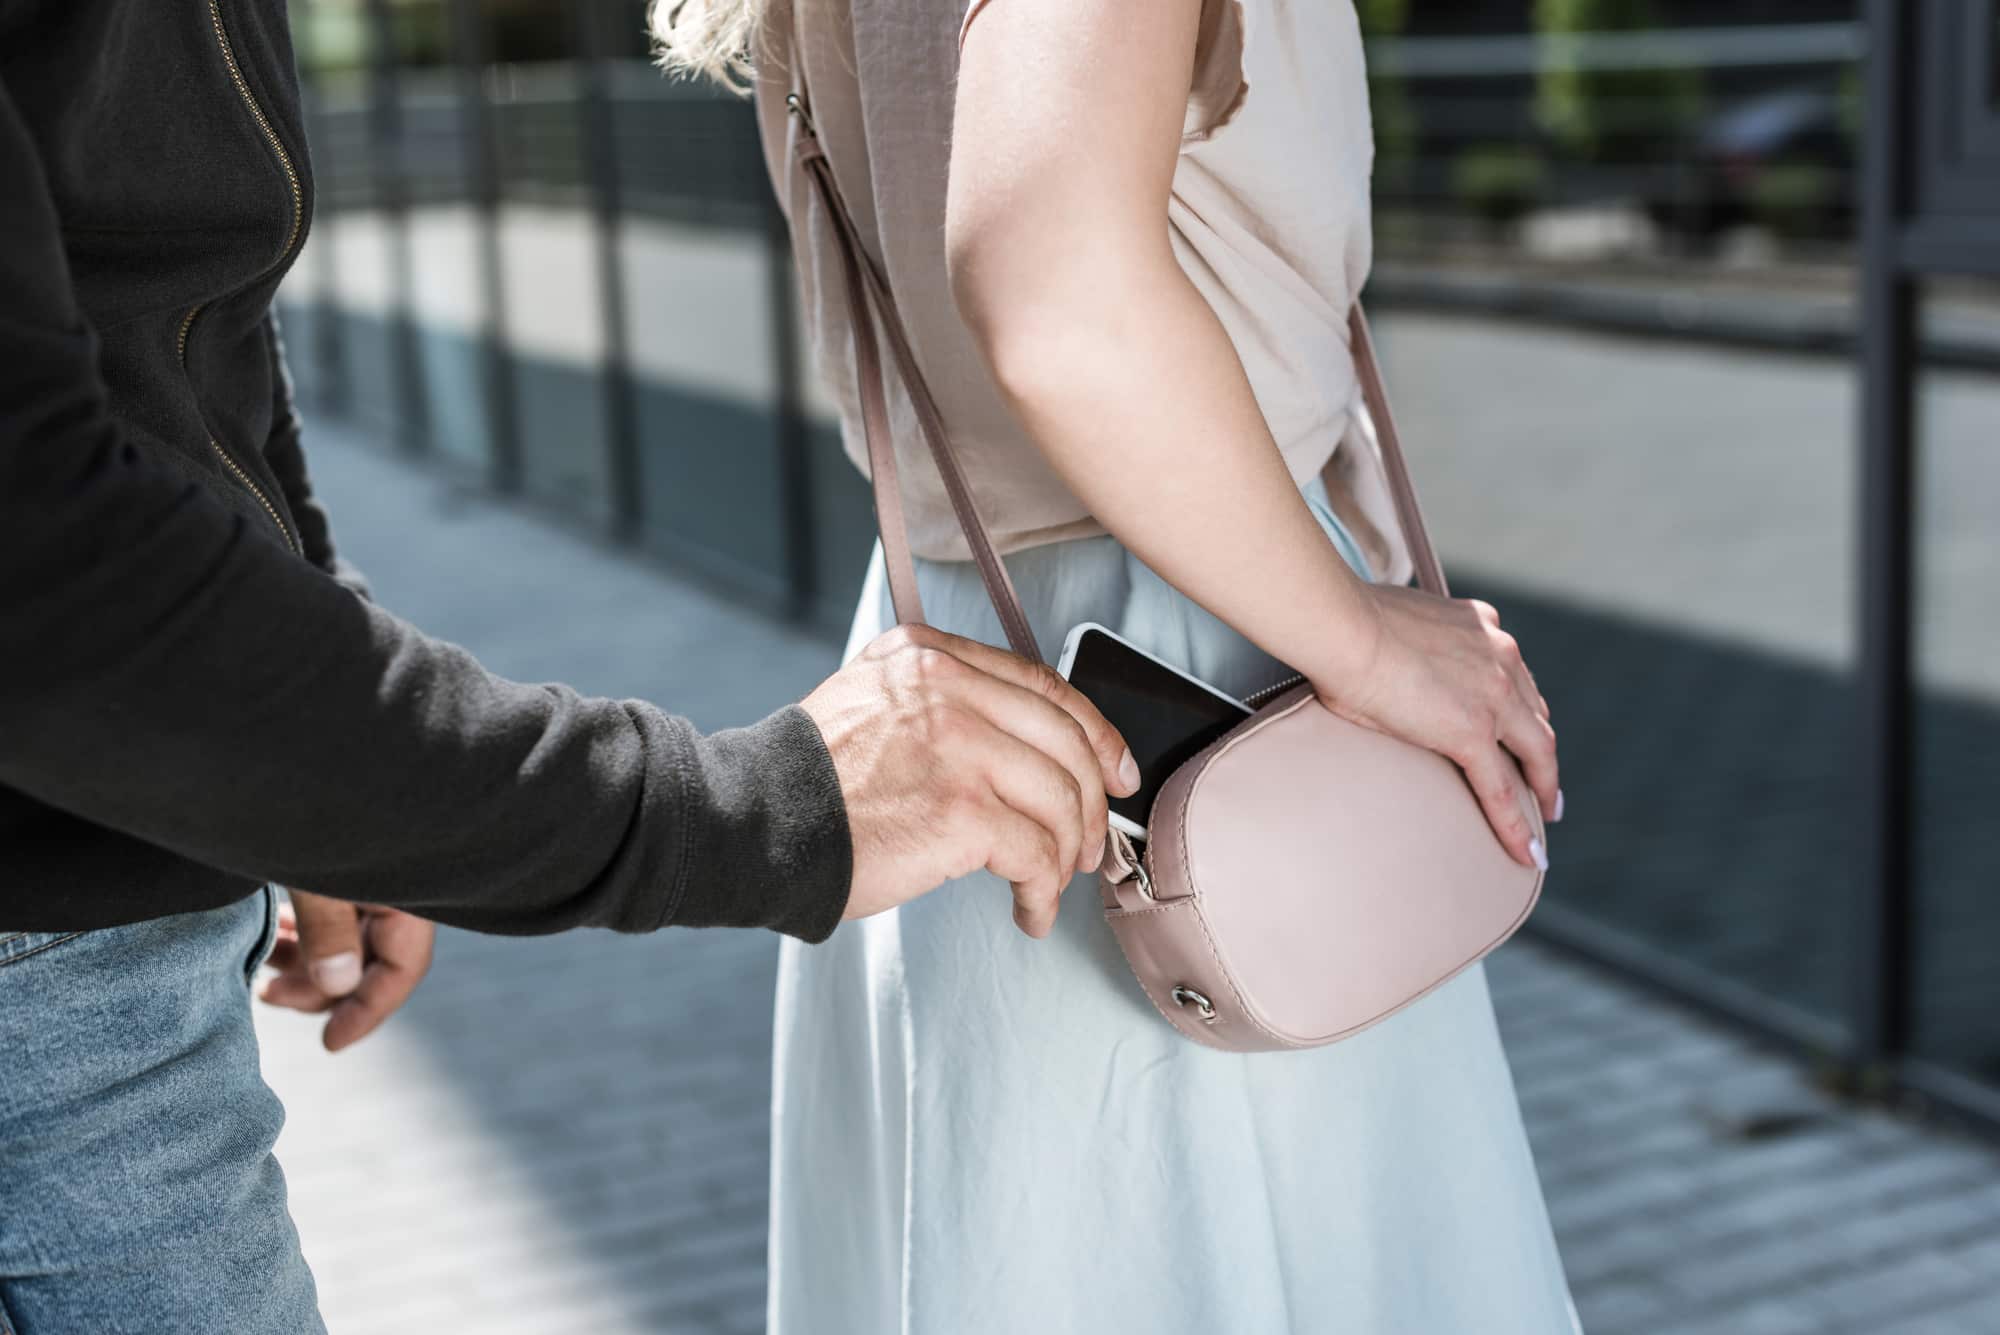 A man is holding a pink purse while a woman is standing next to him.